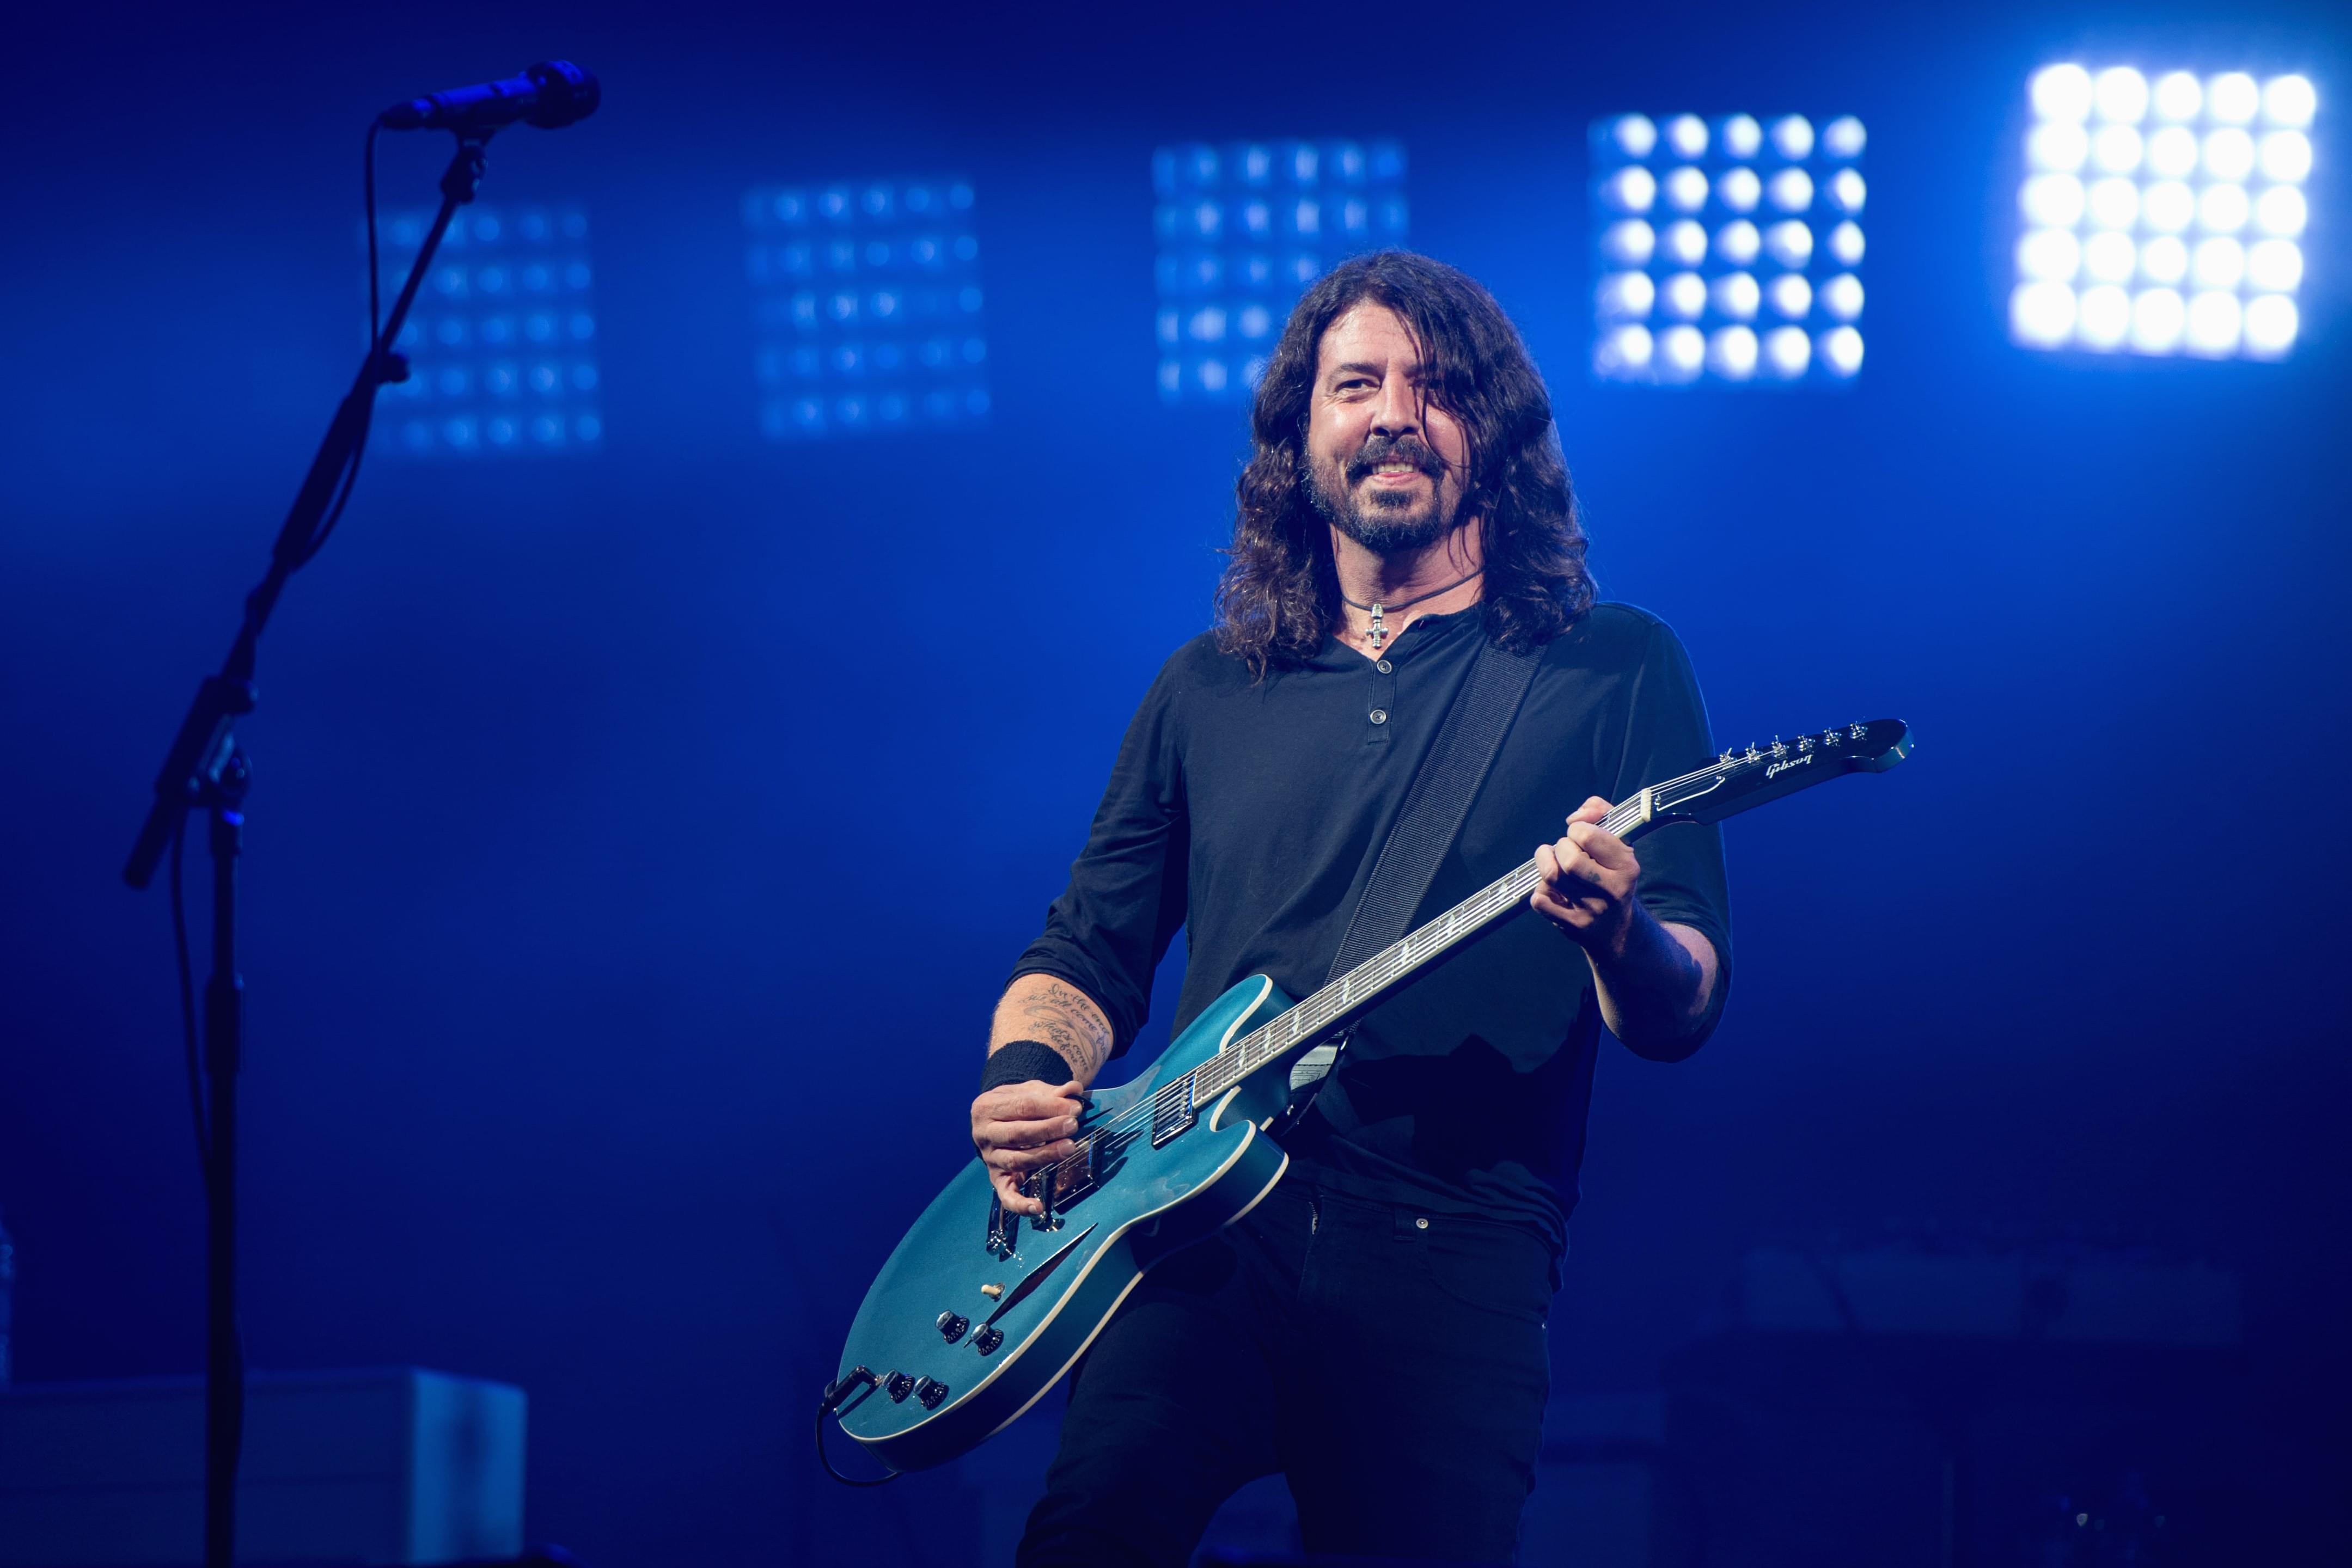 Paramore’s Hayley Williams Joins Foo Fighters For ‘My Hero’ at Bonnaroo [VIDEO]